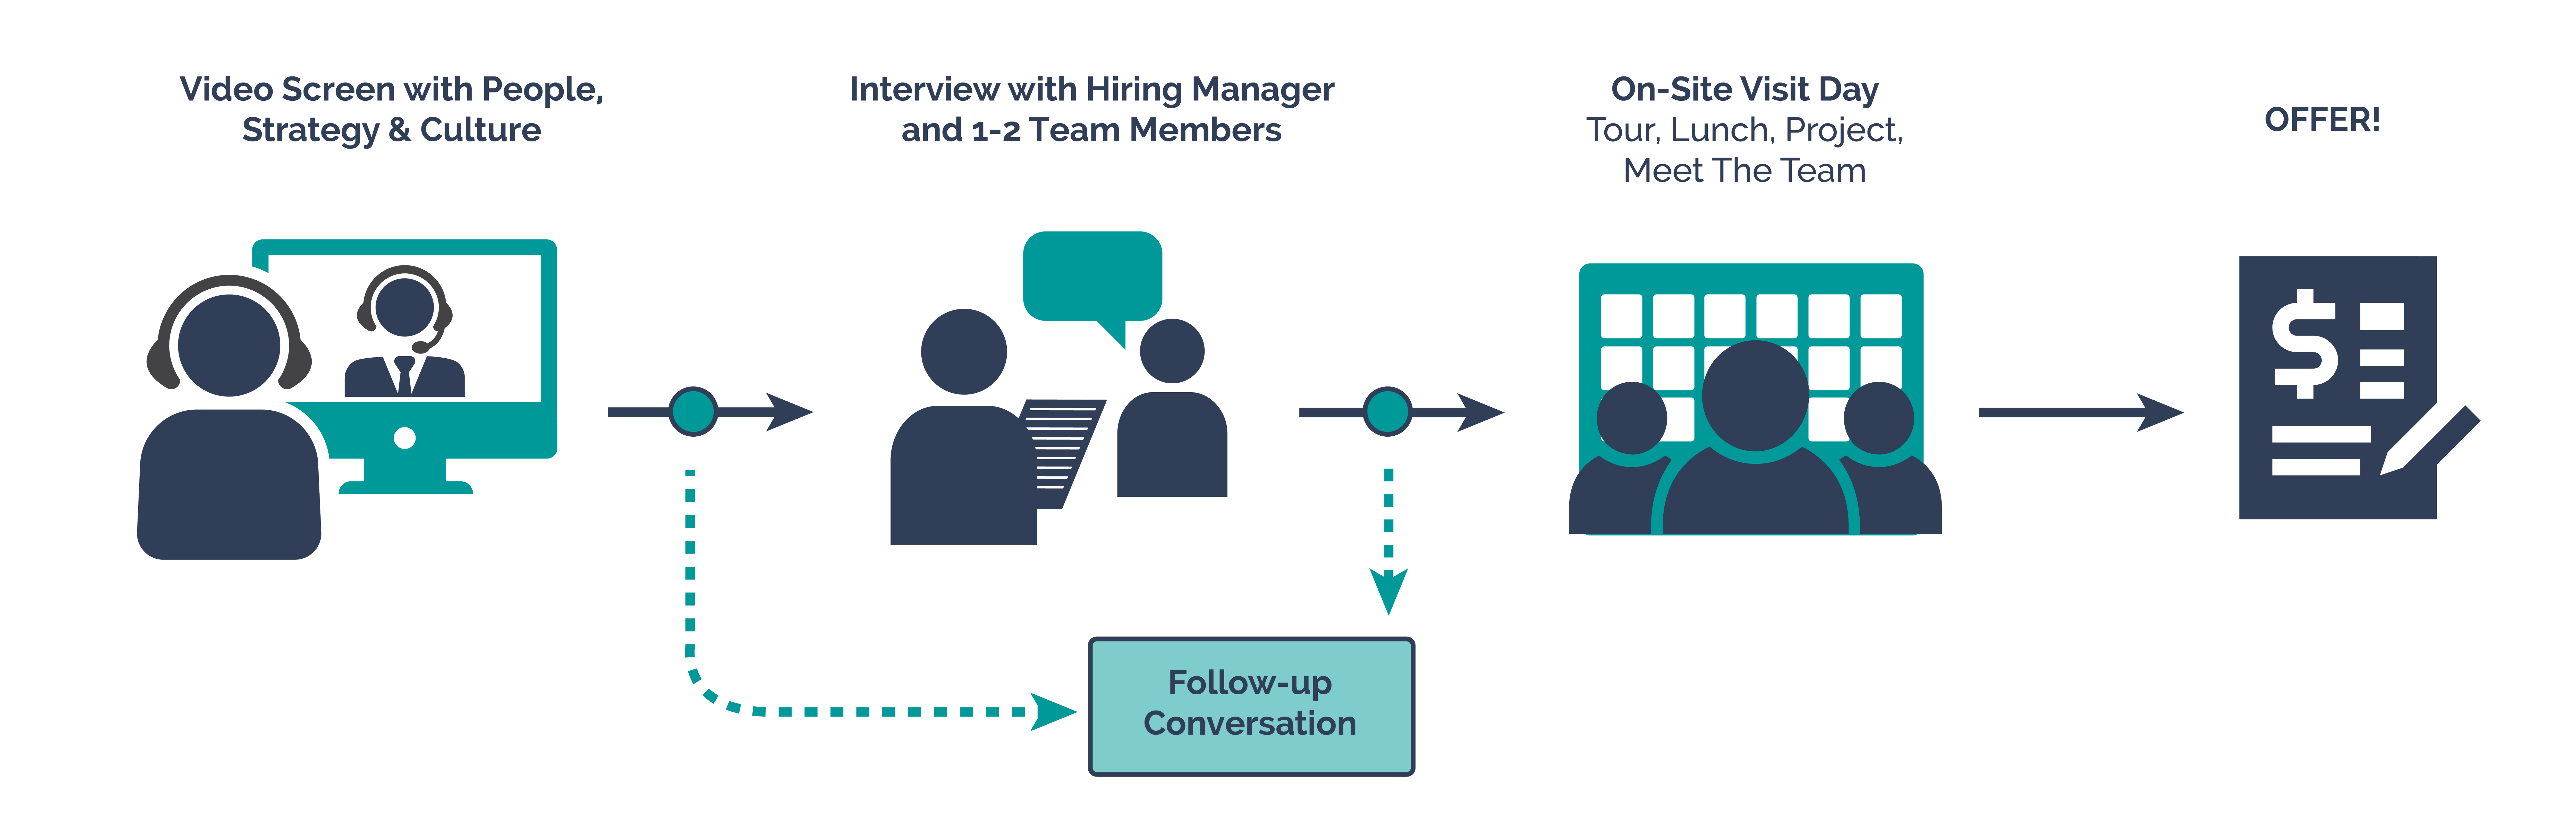 Interview Process Graphic